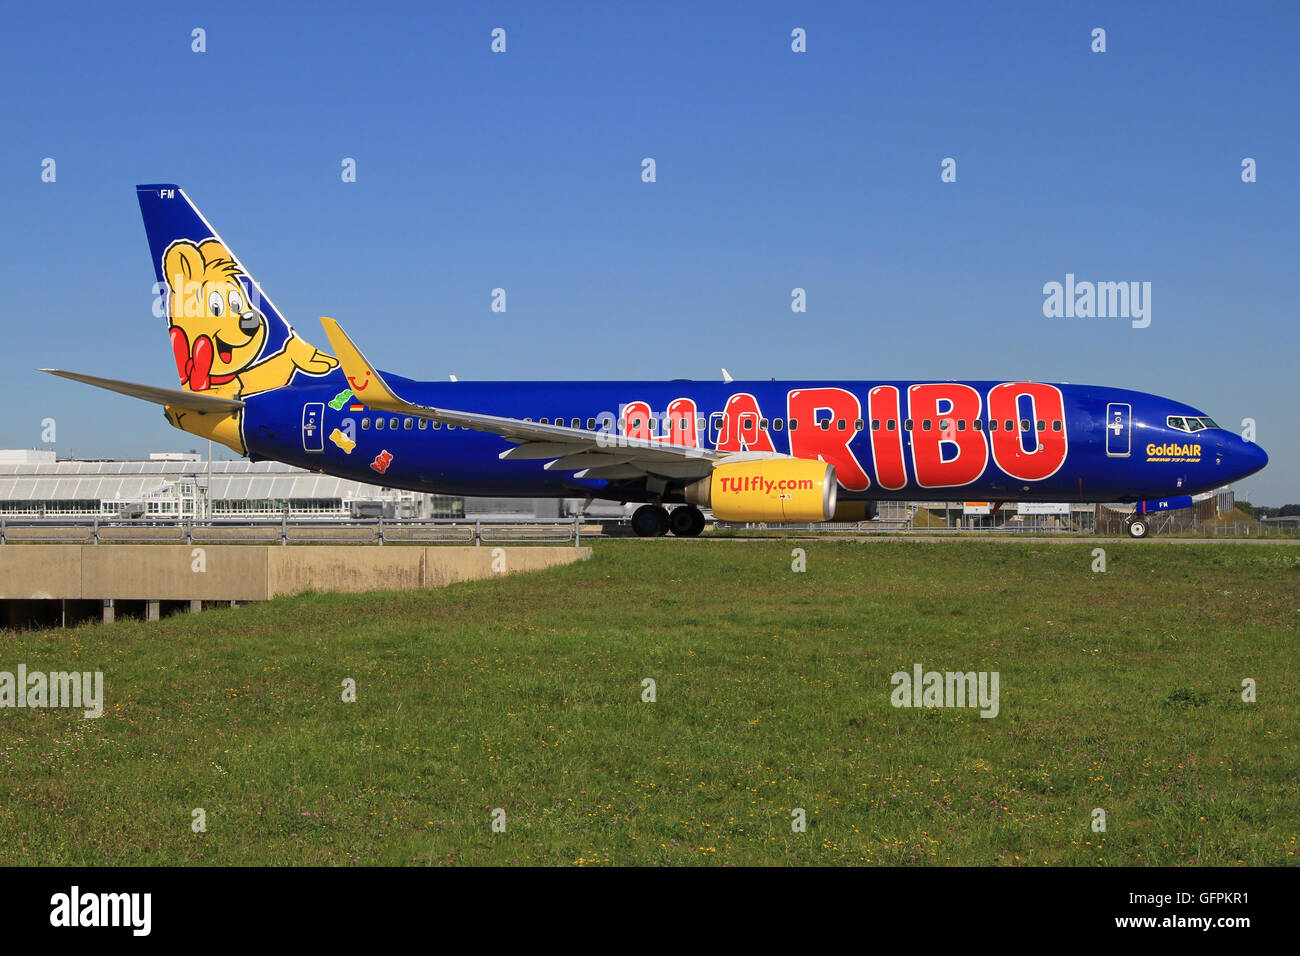 Munic/Germany September 22, 2012: Boeing 737 from Tuifly with Haribo livery ready to takeoff at MUNIC Airport. Stock Photo